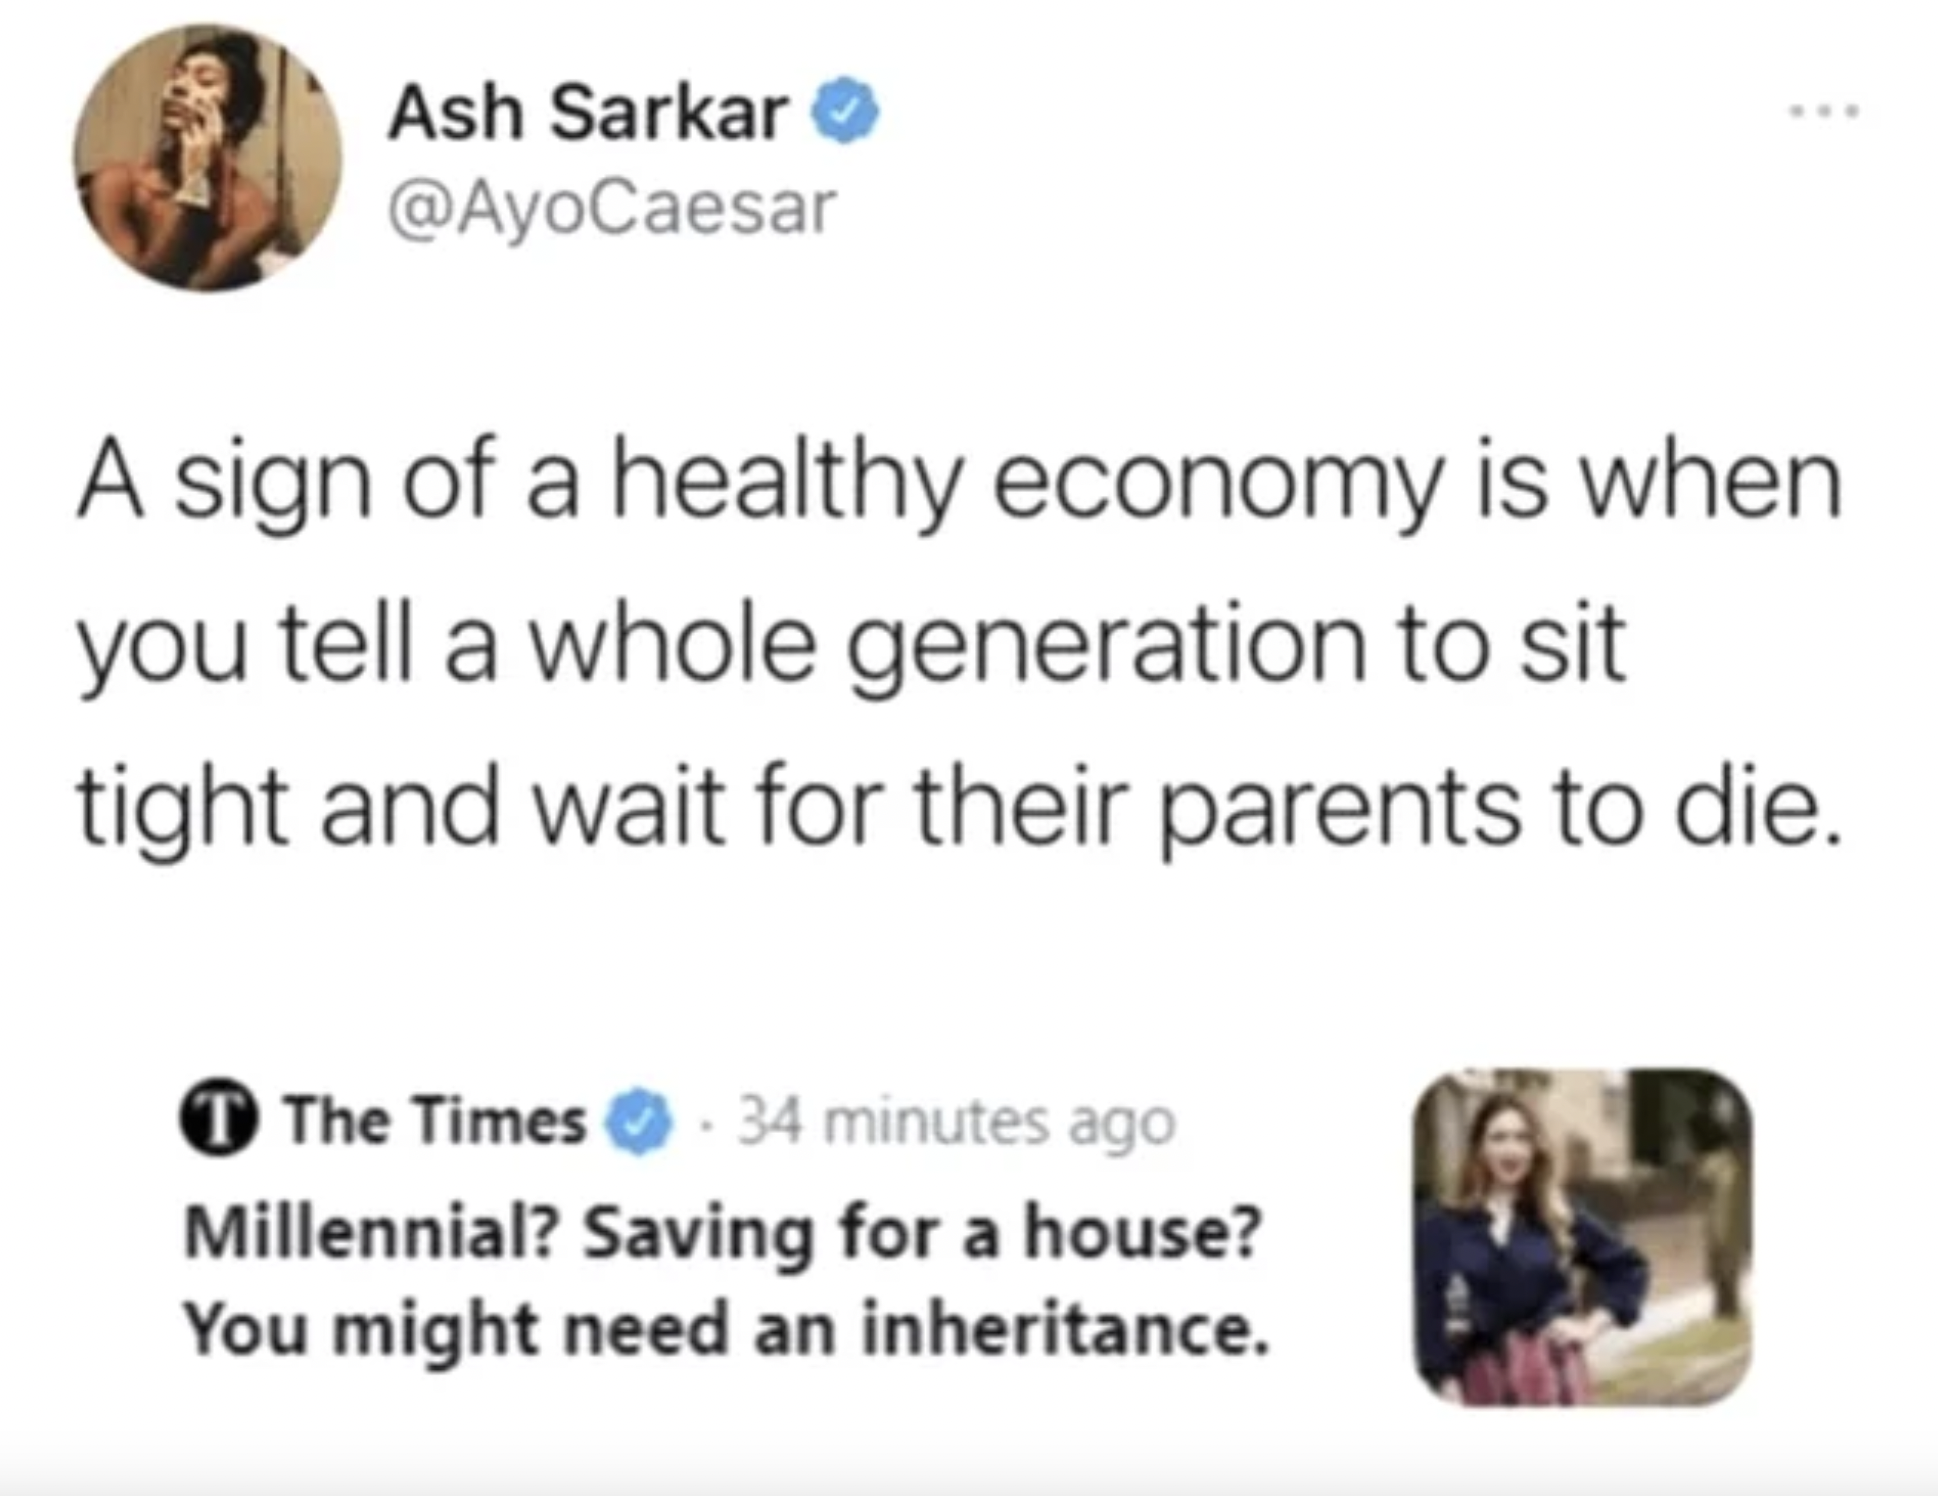 Ash Sarkar - Ash Sarkar A sign of a healthy economy is when you tell a whole generation to sit tight and wait for their parents to die. T The Times 34 minutes ago Millennial? Saving for a house? You might need an inheritance.